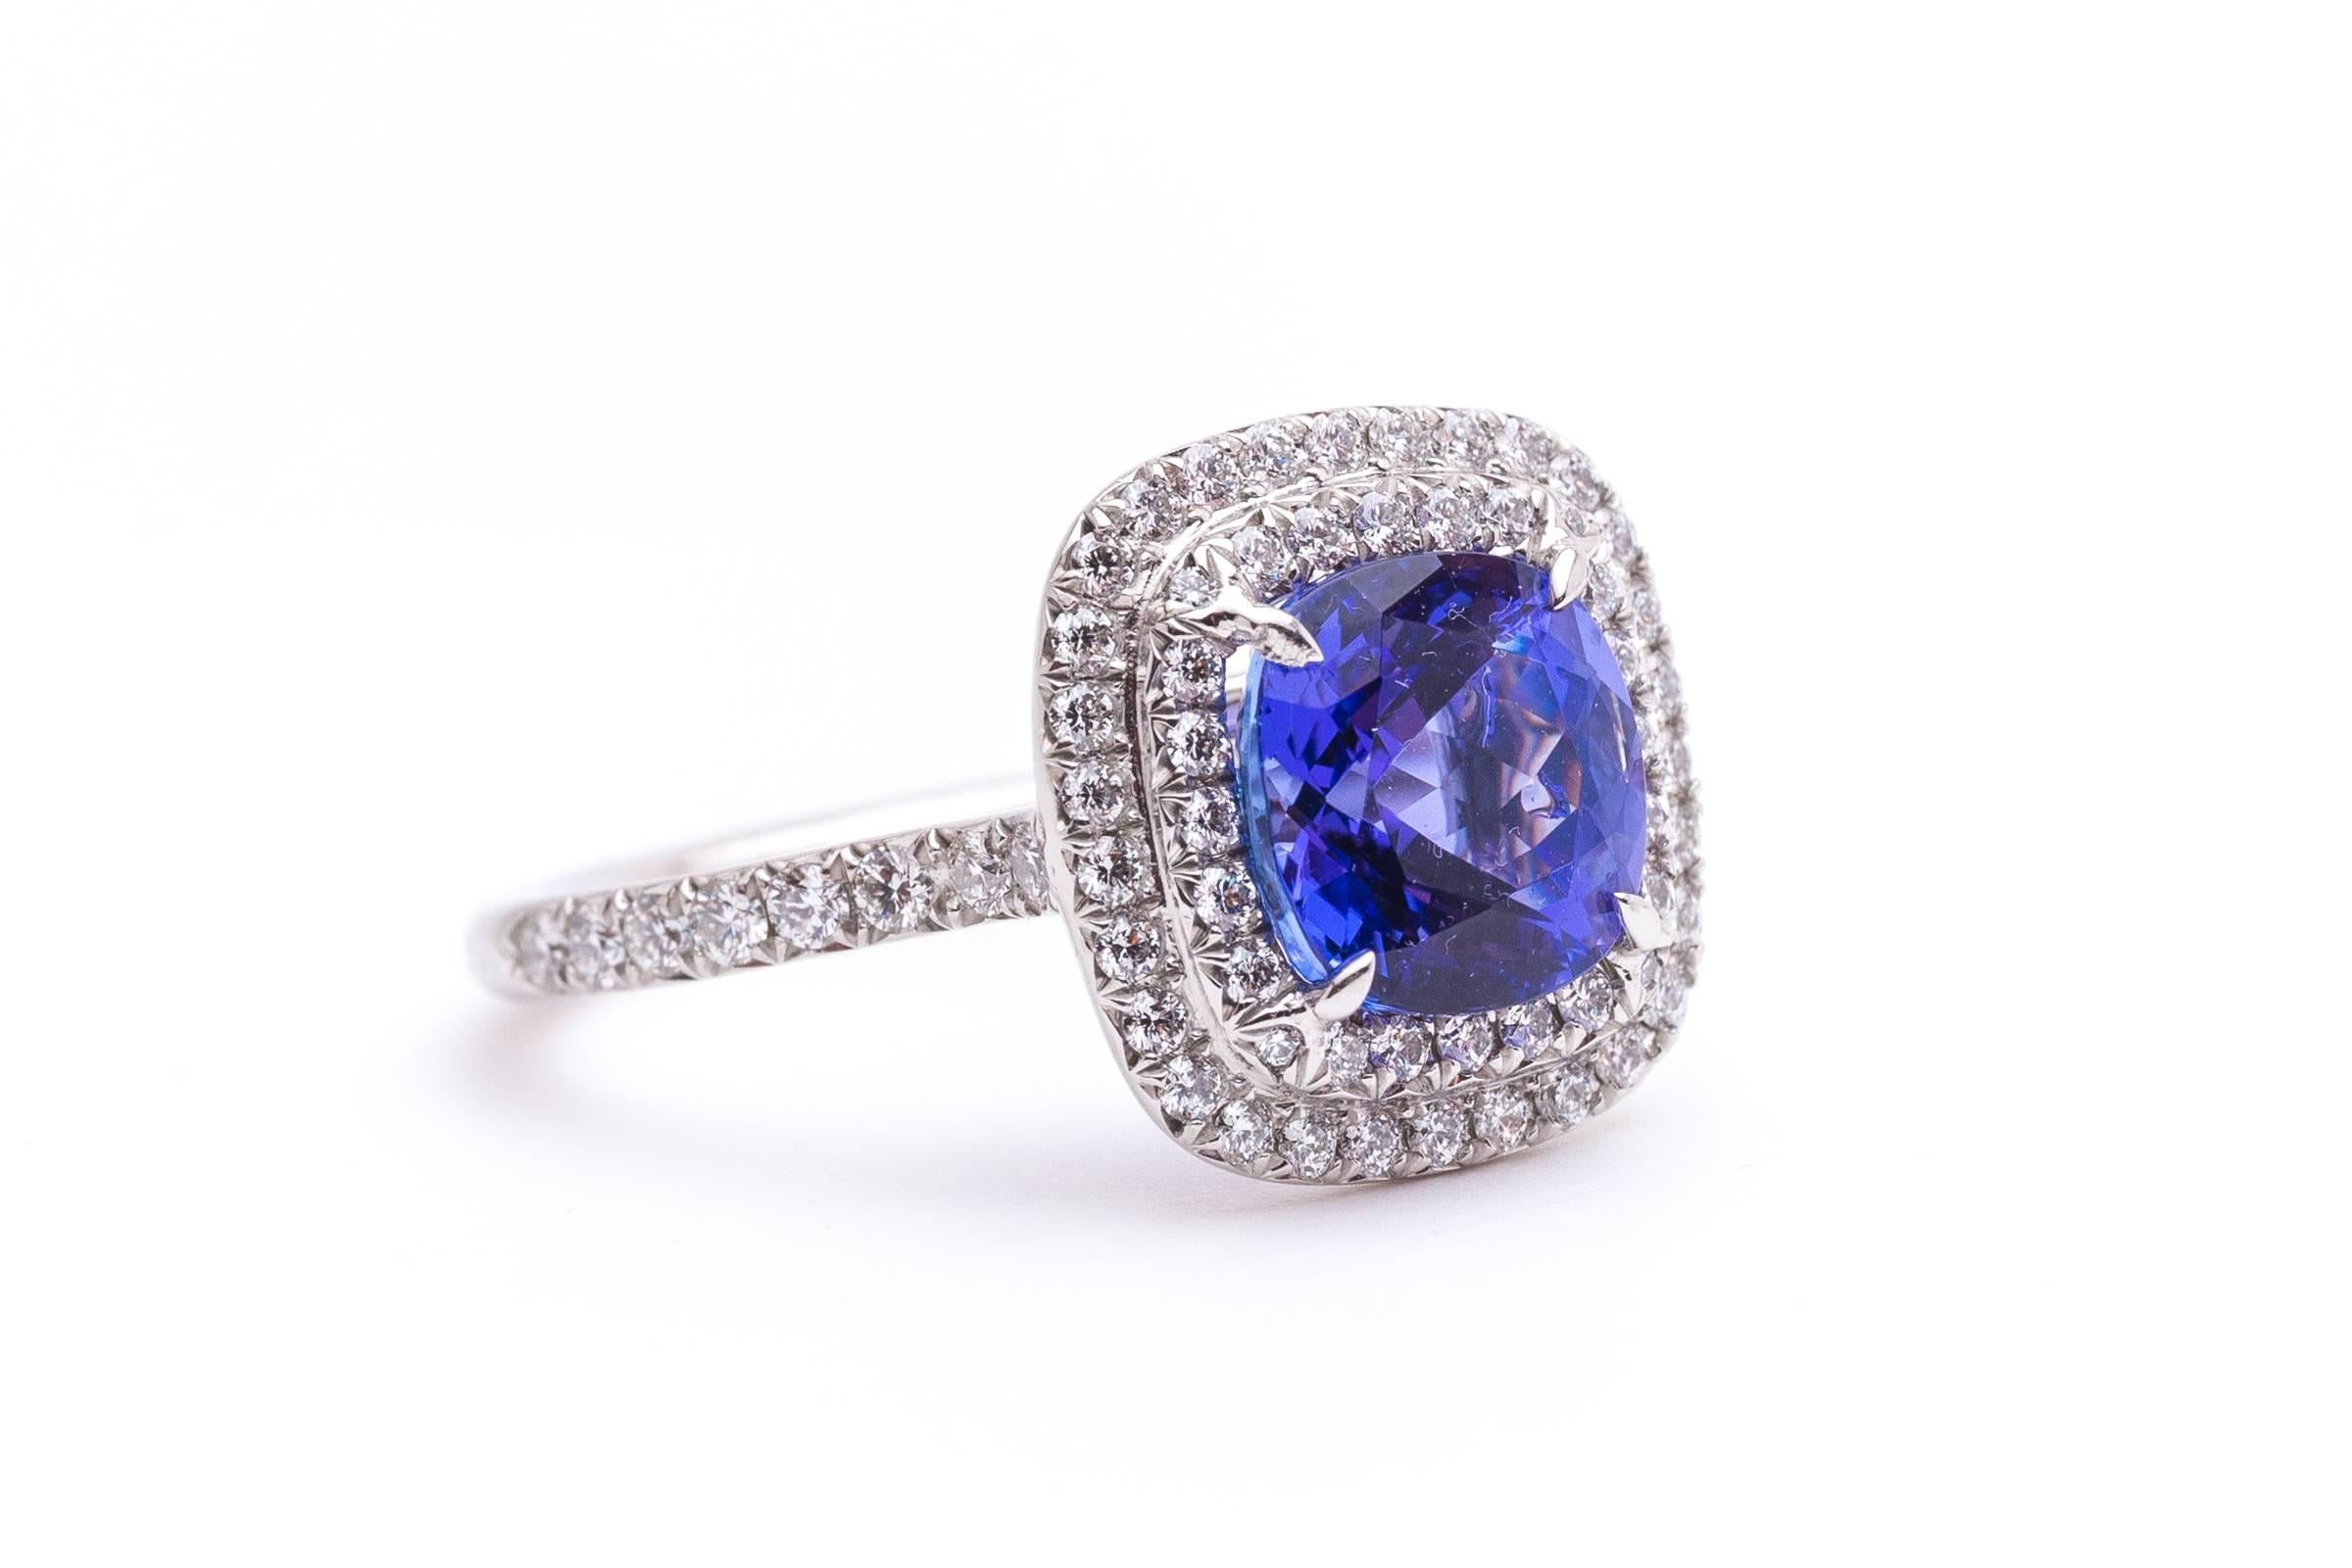 Beacon Hill Jewelers Presents:

A Tiffany & Co. Soleste collection tanzanite and diamond ring in luxurious platinum.  Centered by a beautiful and top quality 2 carat cushion shaped tanzanite this ring features a double halo of sparkling brilliant